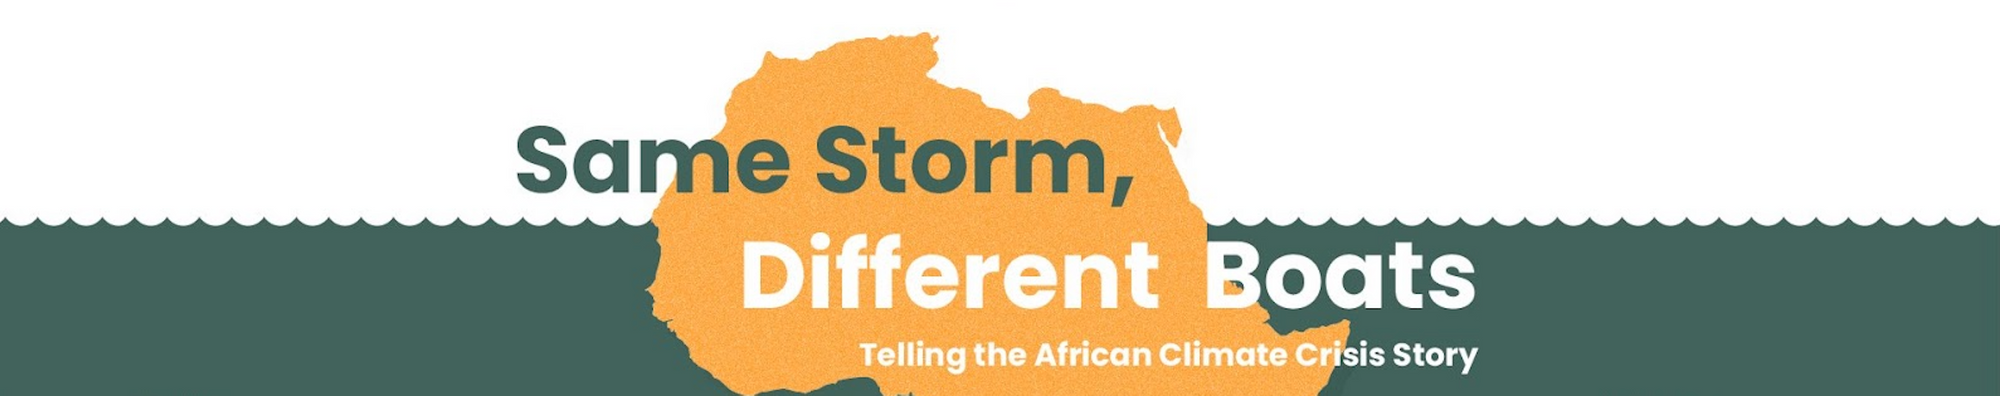 Telling the African Climate Crisis Story